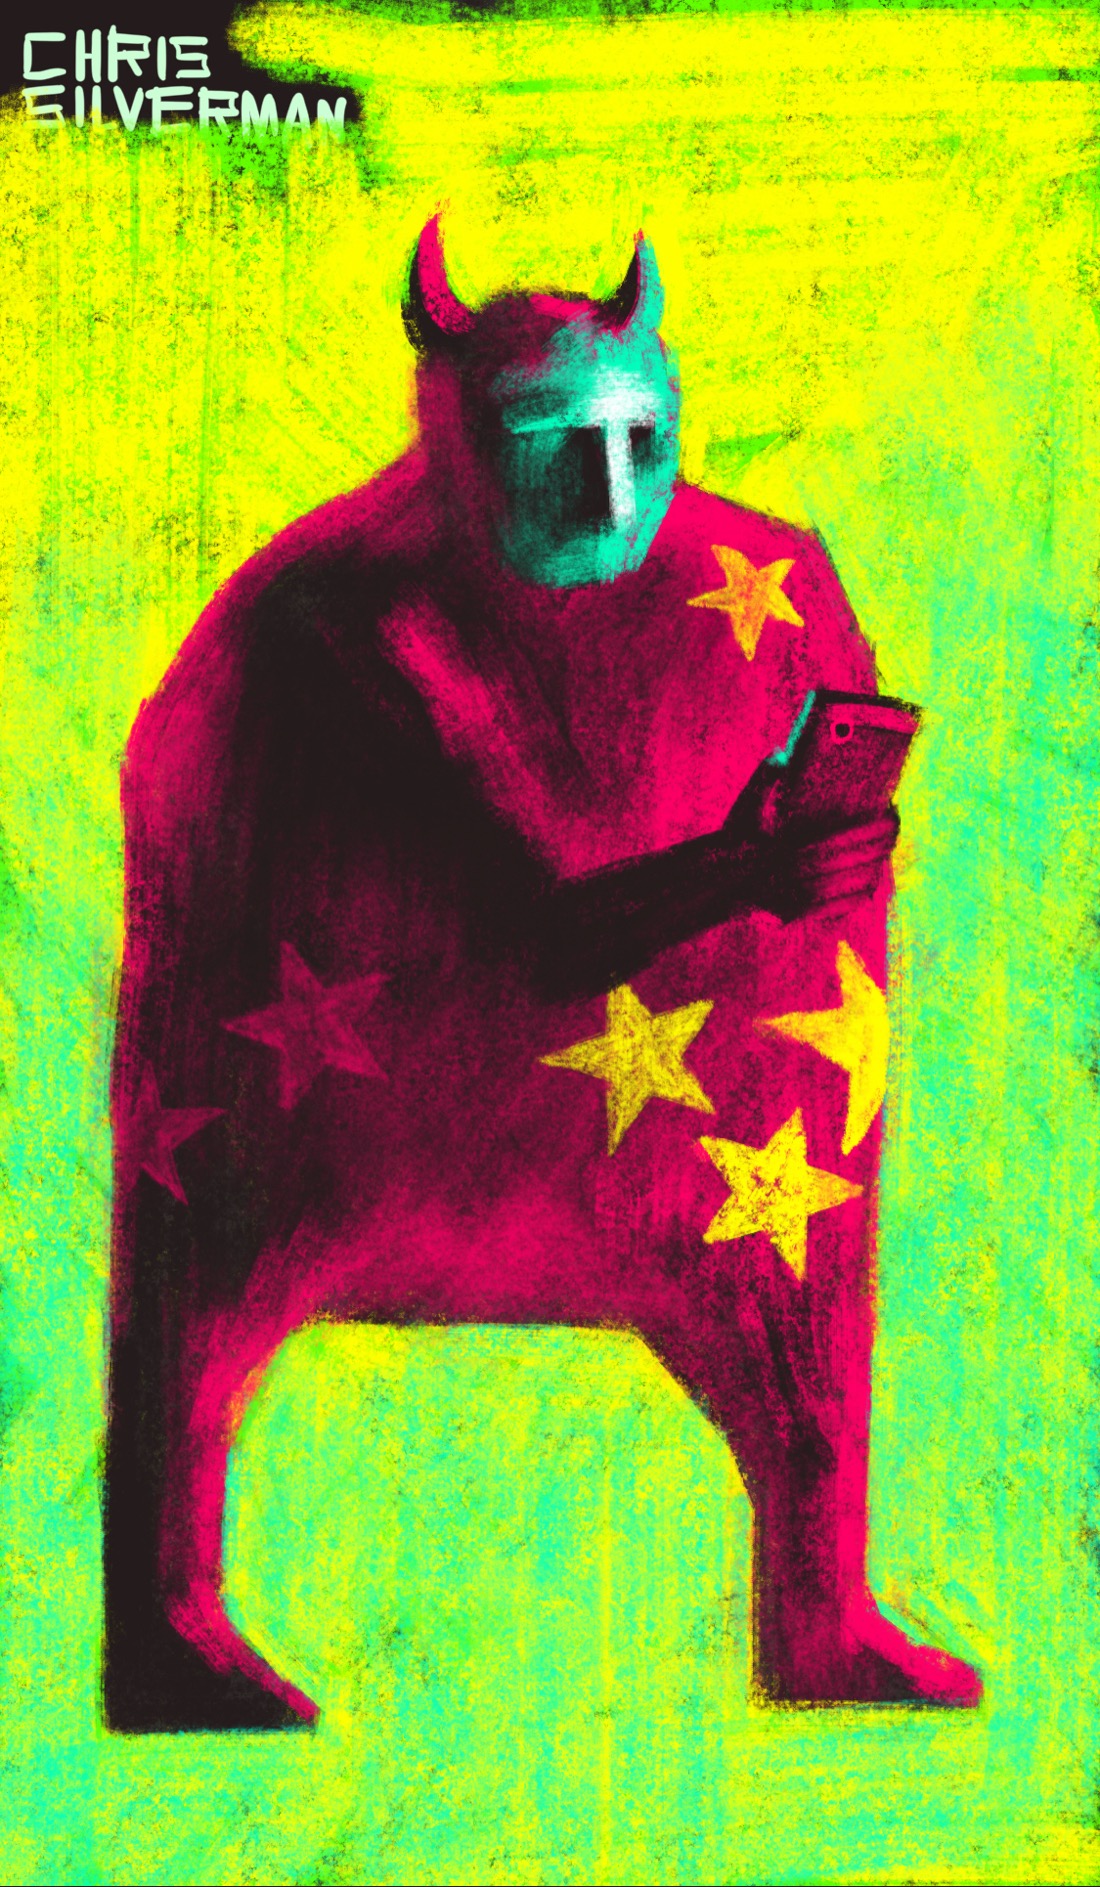 A large figure in a crimson jumper with yellow and crimson stars printed at various locations on it. The figure is very wide and looking at a phone in its hand. It has devil horns. Its face is illuminated blue from the phone screen, and it is set against a yellow-green background.